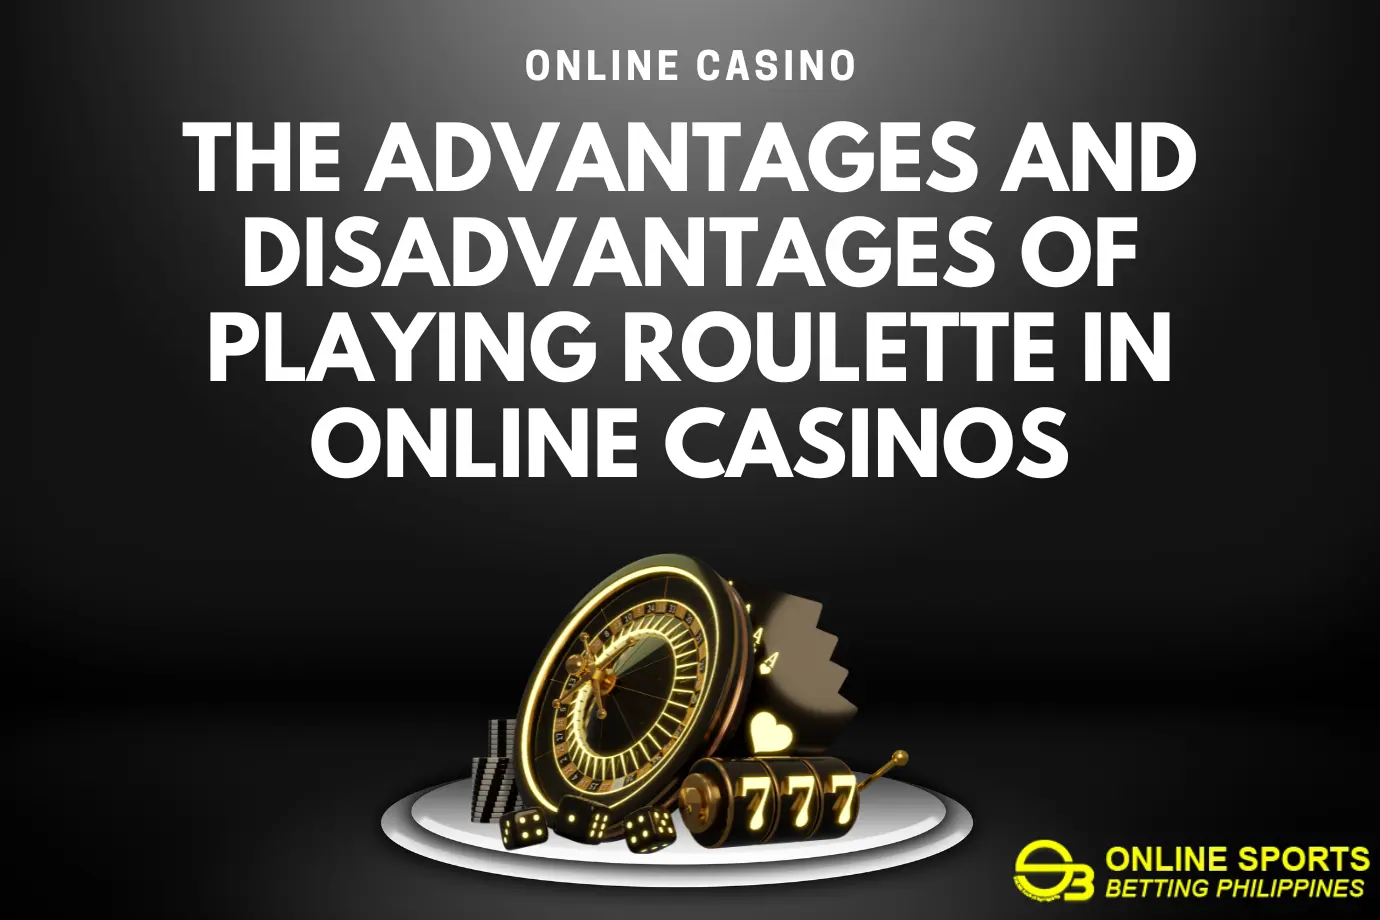 The Advantages and Disadvantages of Playing Roulette in Online Casinos